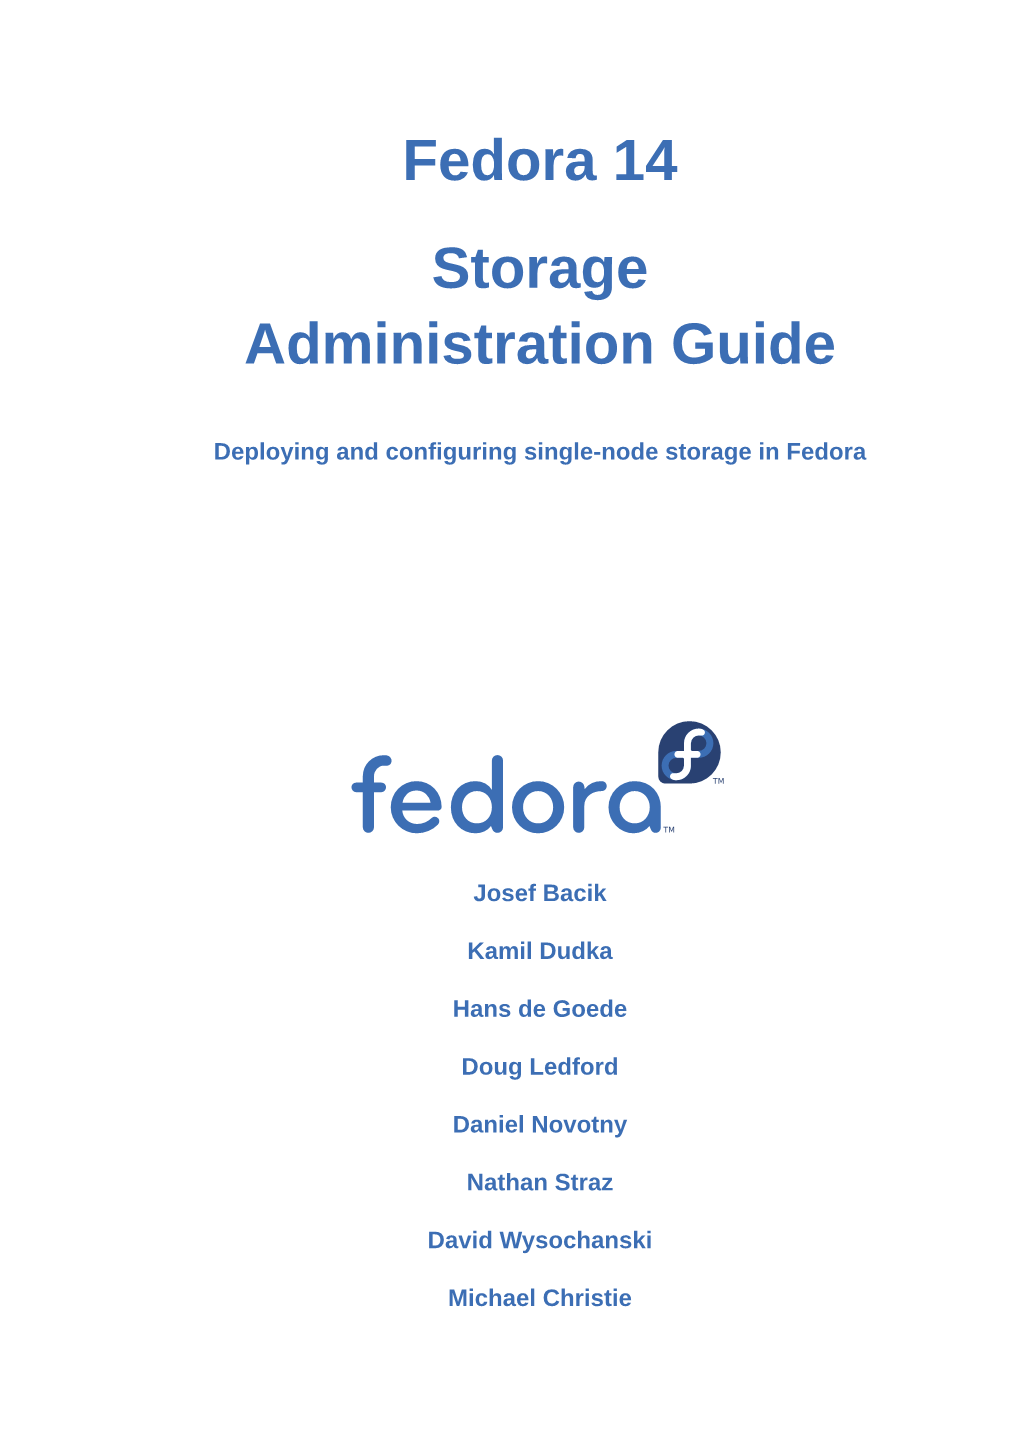 Storage Administration Guide